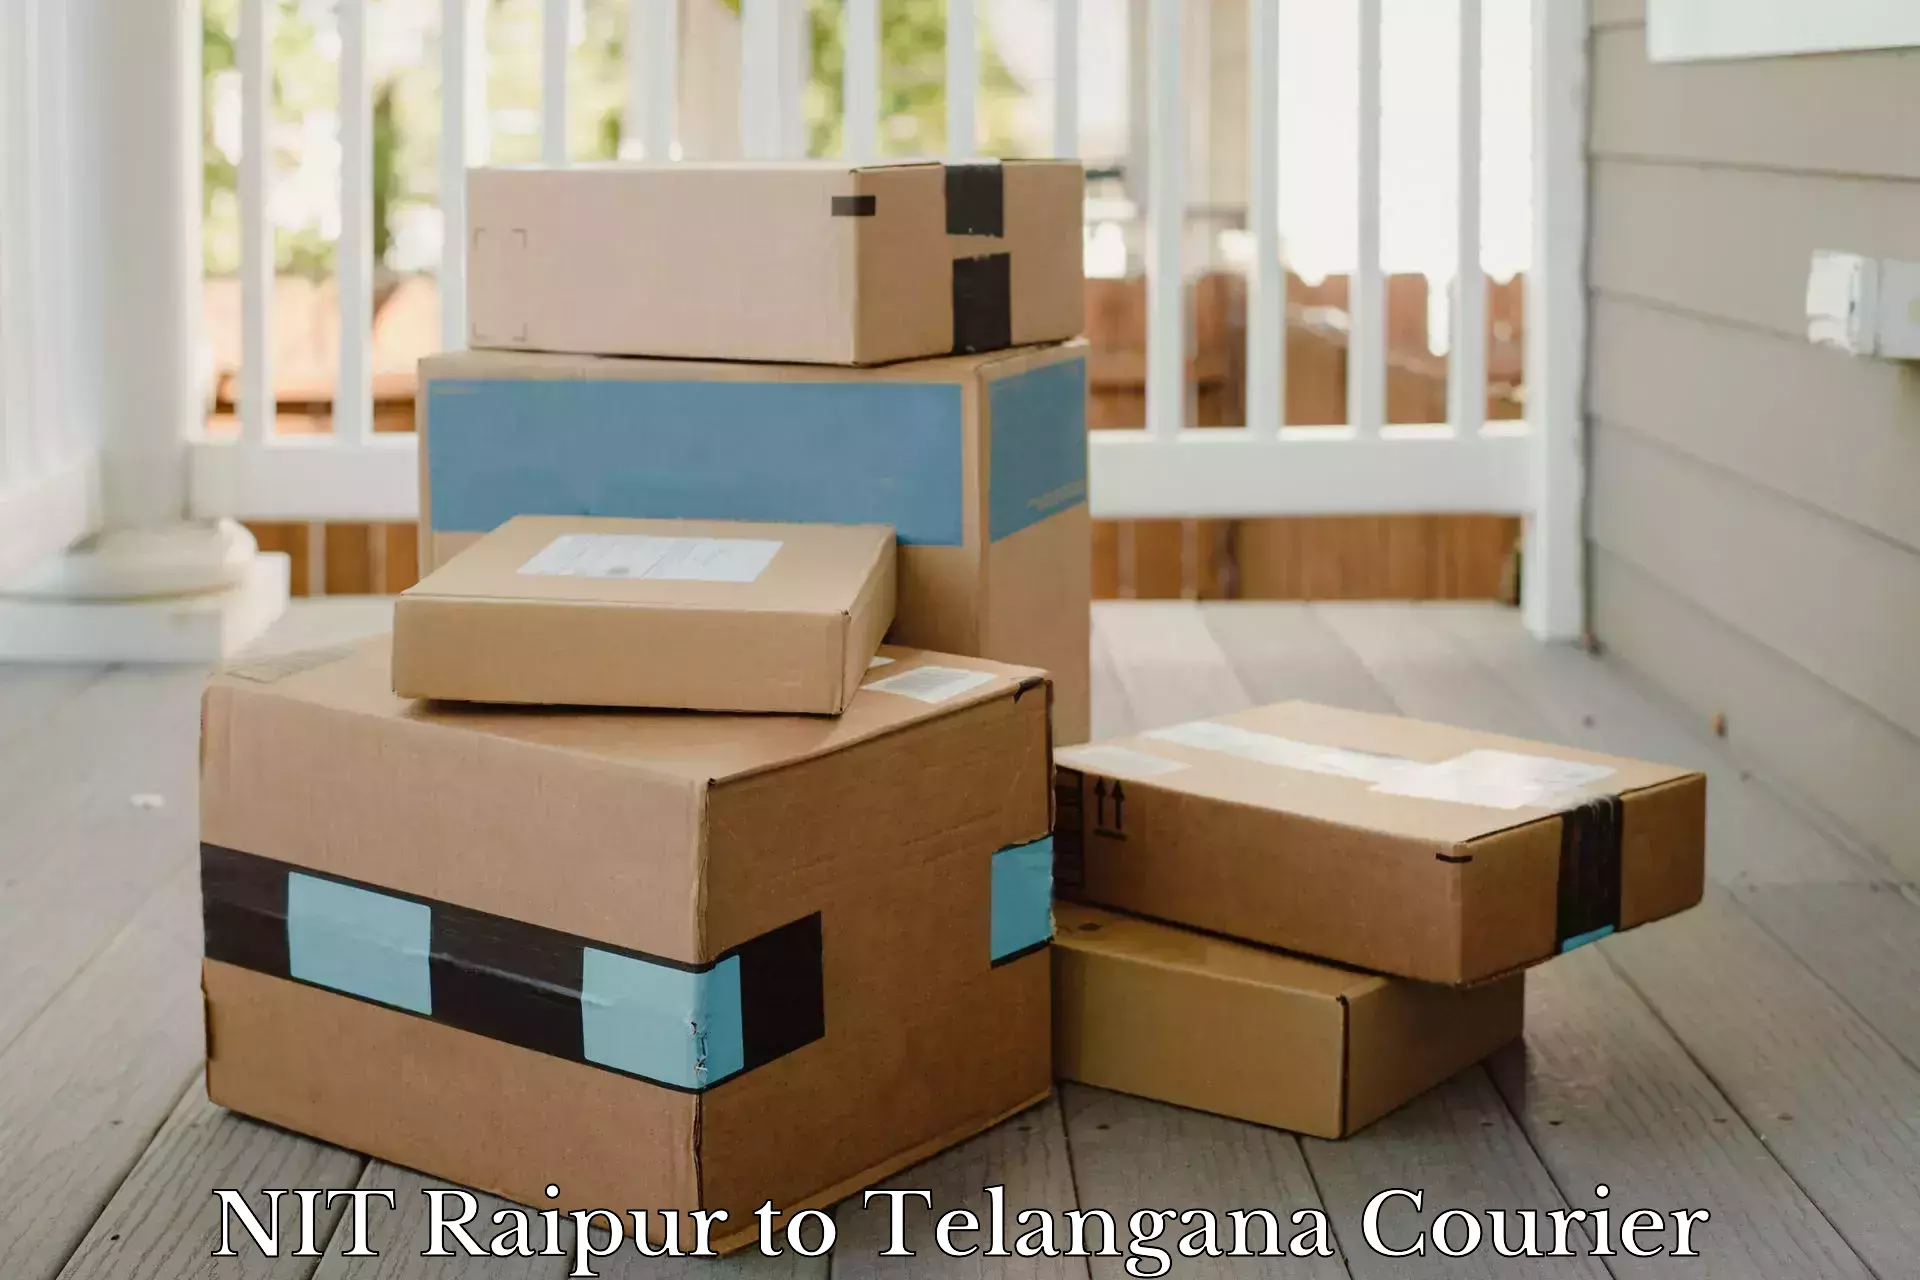 24-hour courier service NIT Raipur to Rangareddy